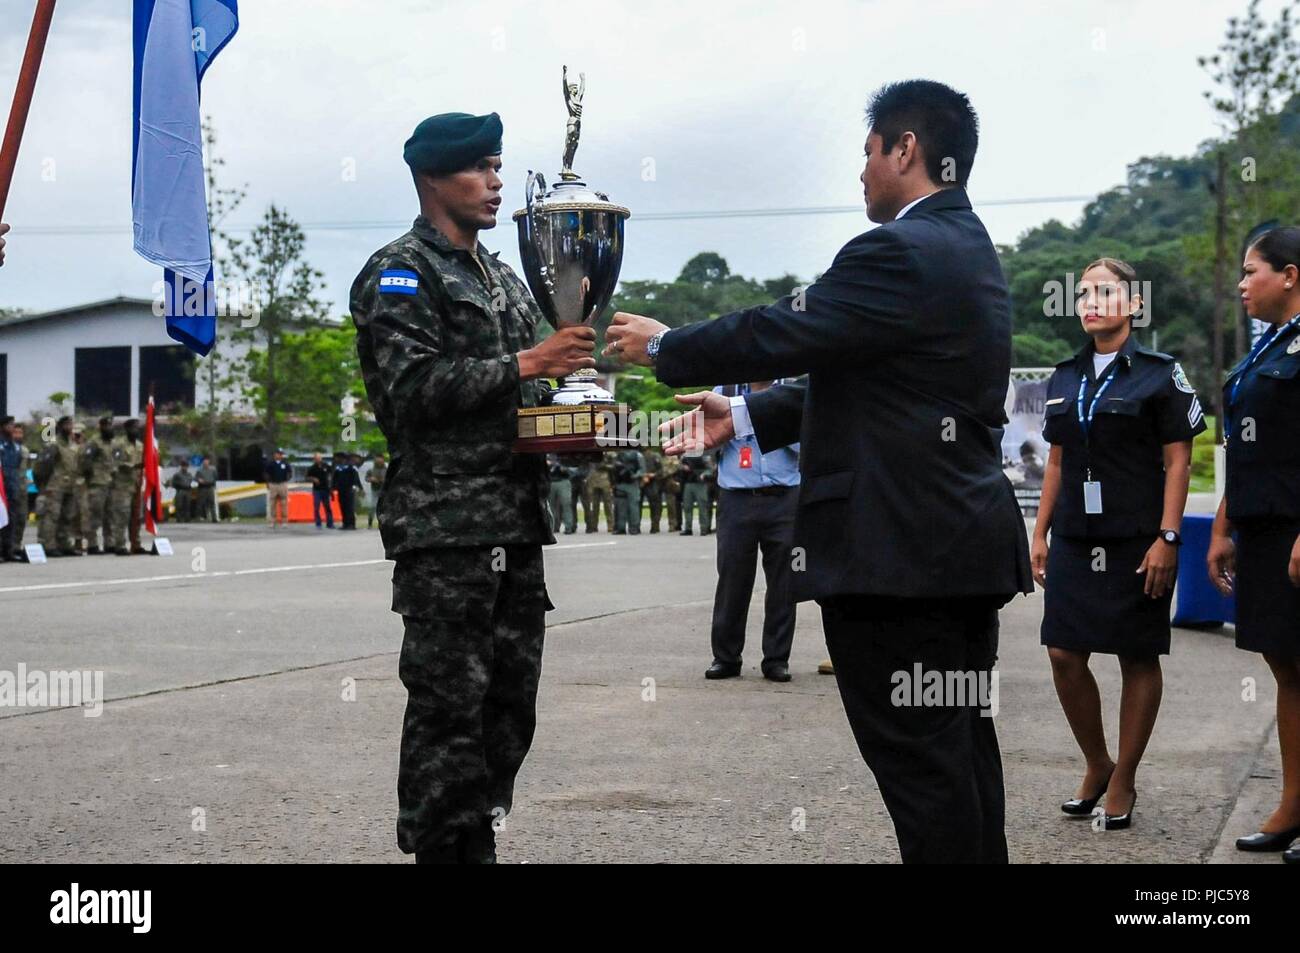 A Honduras Comando passes the Fuerzas Comando trophy to Minister Alexis Bethancourt Yau, minister of public security during the opening ceremony for Fuerzas Comando, July 16, 2018, at the Instituto Superior Policial, Panama. Fuerzas Comando is an annual multinational special operations forces skills competition sponsored by U.S. Southern Command and hosted this year by the Ministry of Public Security, Panama. Through friendly competition, this exercise promotes interoperability, military-to-military relationships, increases training knowledge, and improves regional security. Stock Photo